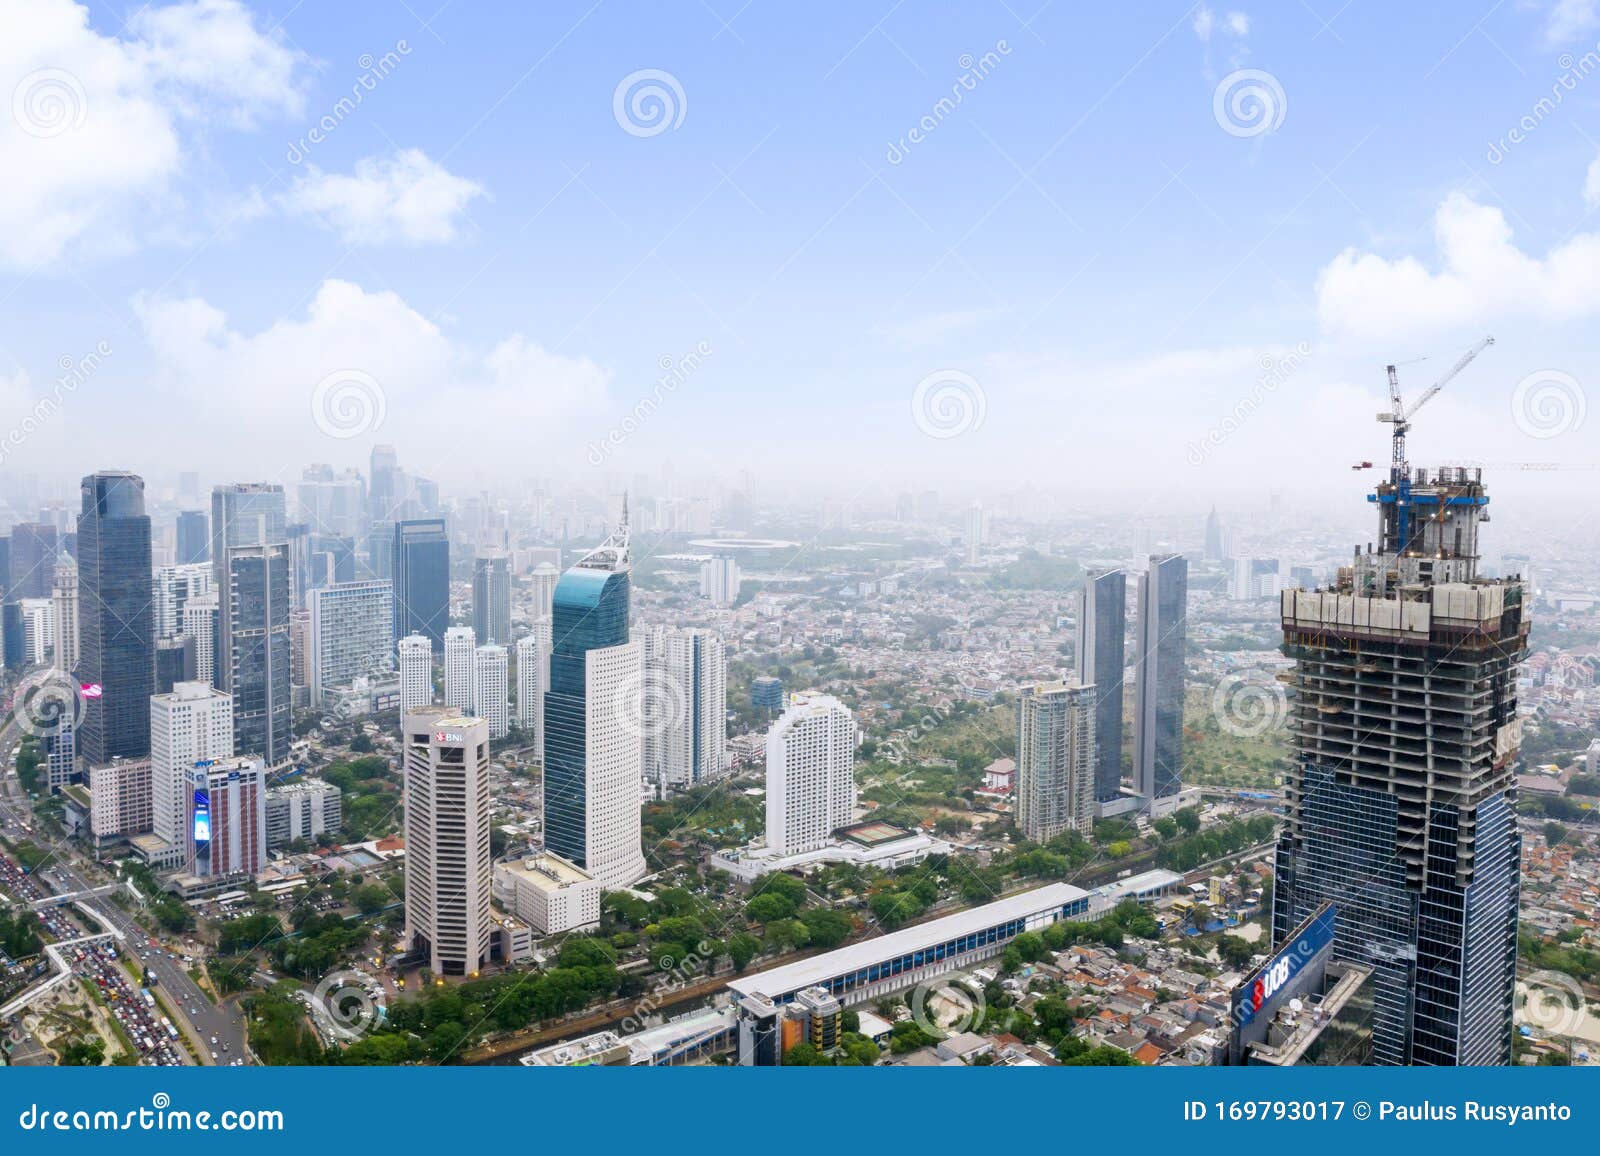 Uob Plaza In Sudirman And Other Famous Skyscrapers Editorial Photography Image Of Building Activity 169793017